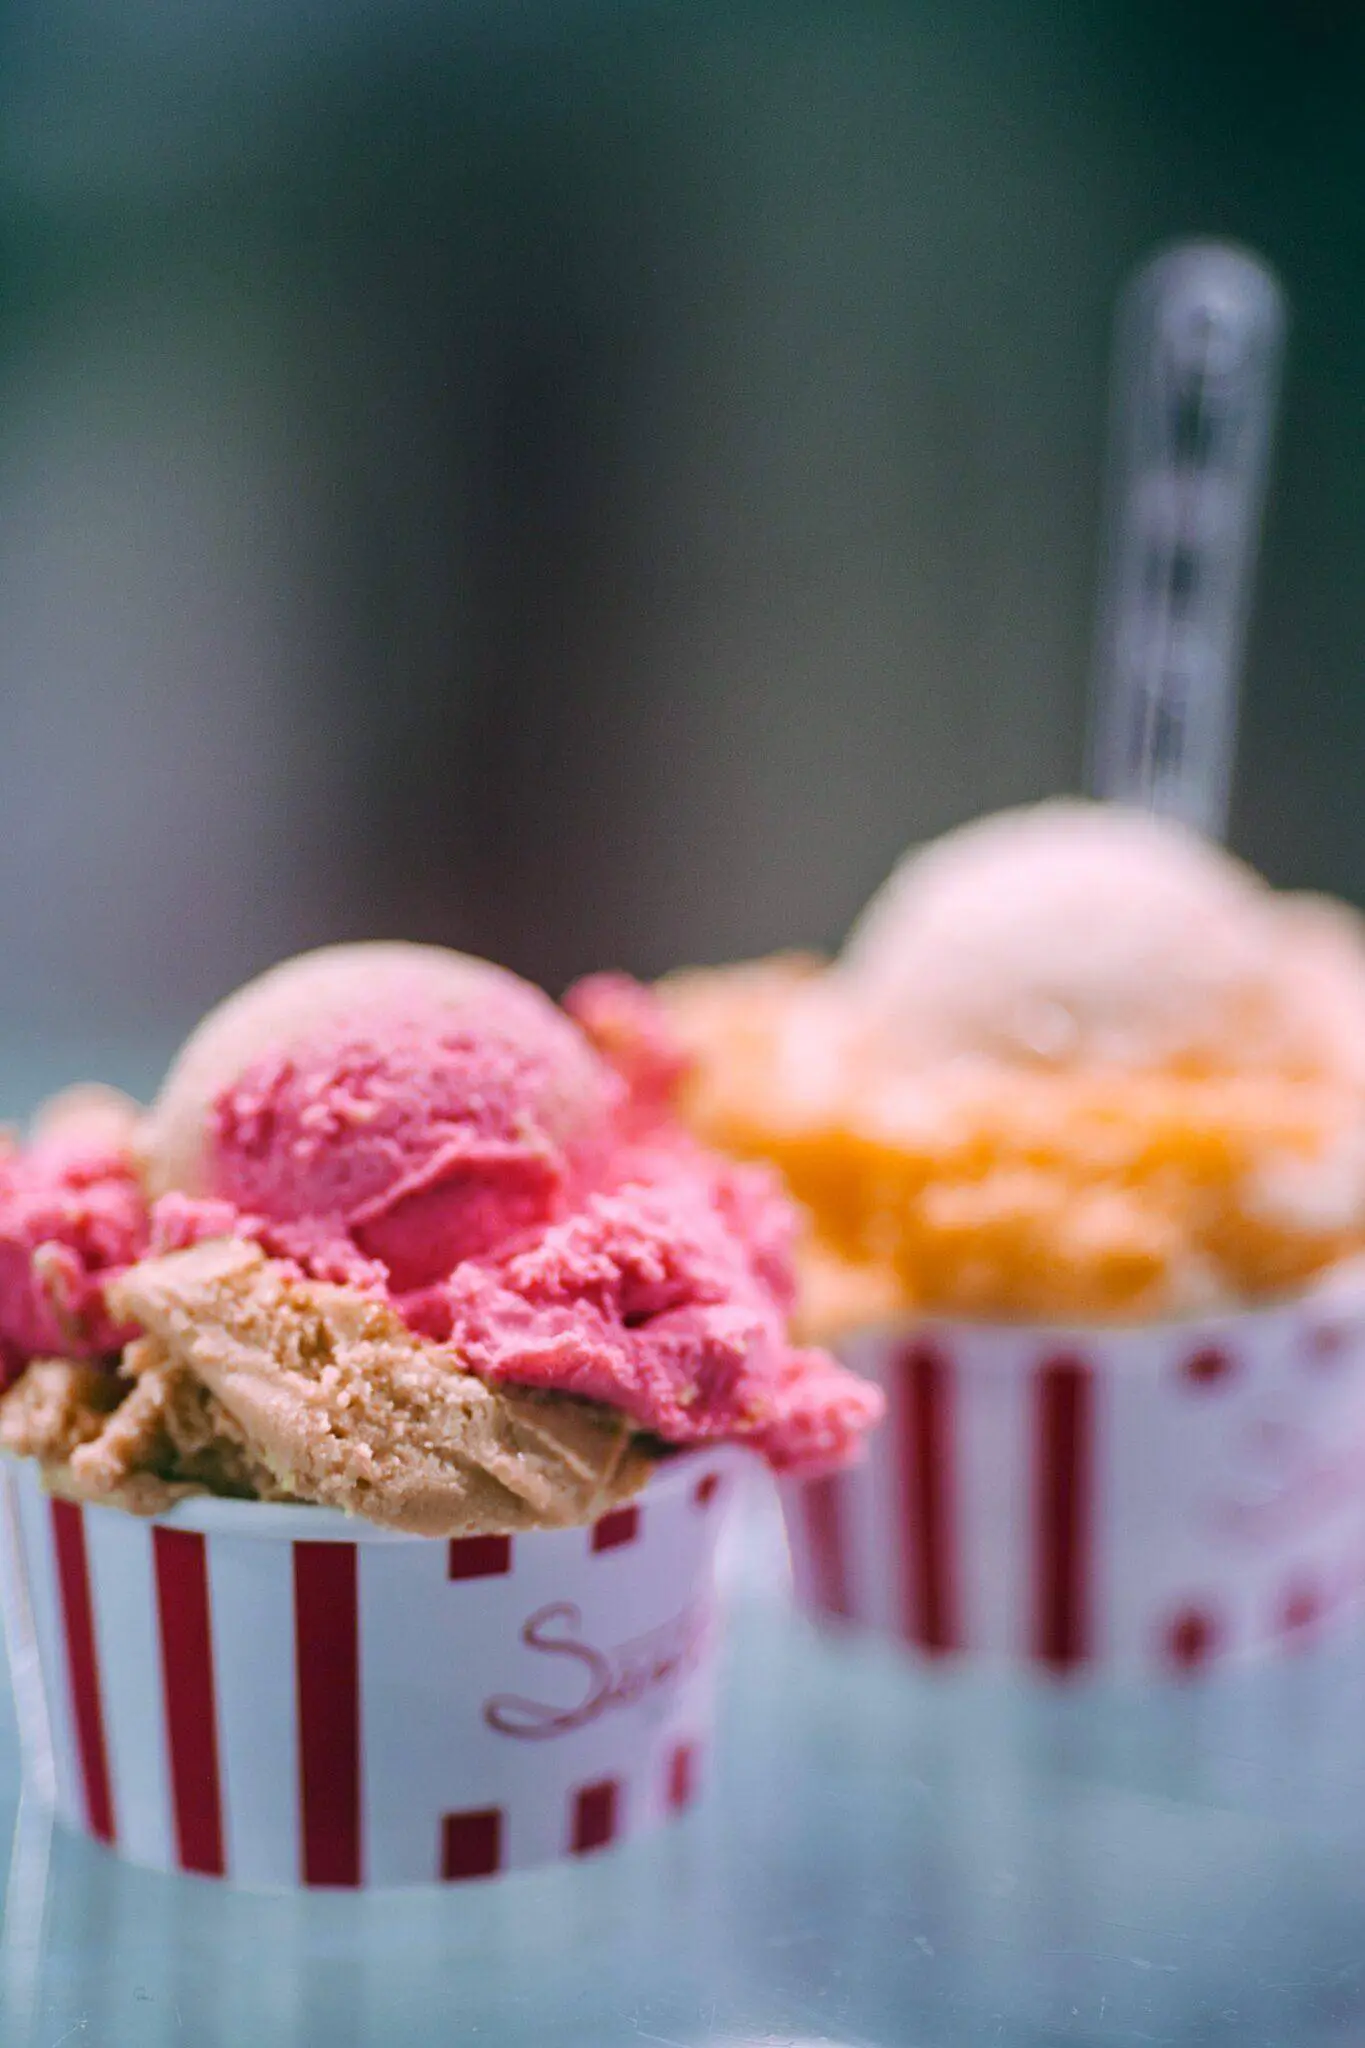 Ice Cream Diet For Weight Loss- Is It Easy And Worth Trying?